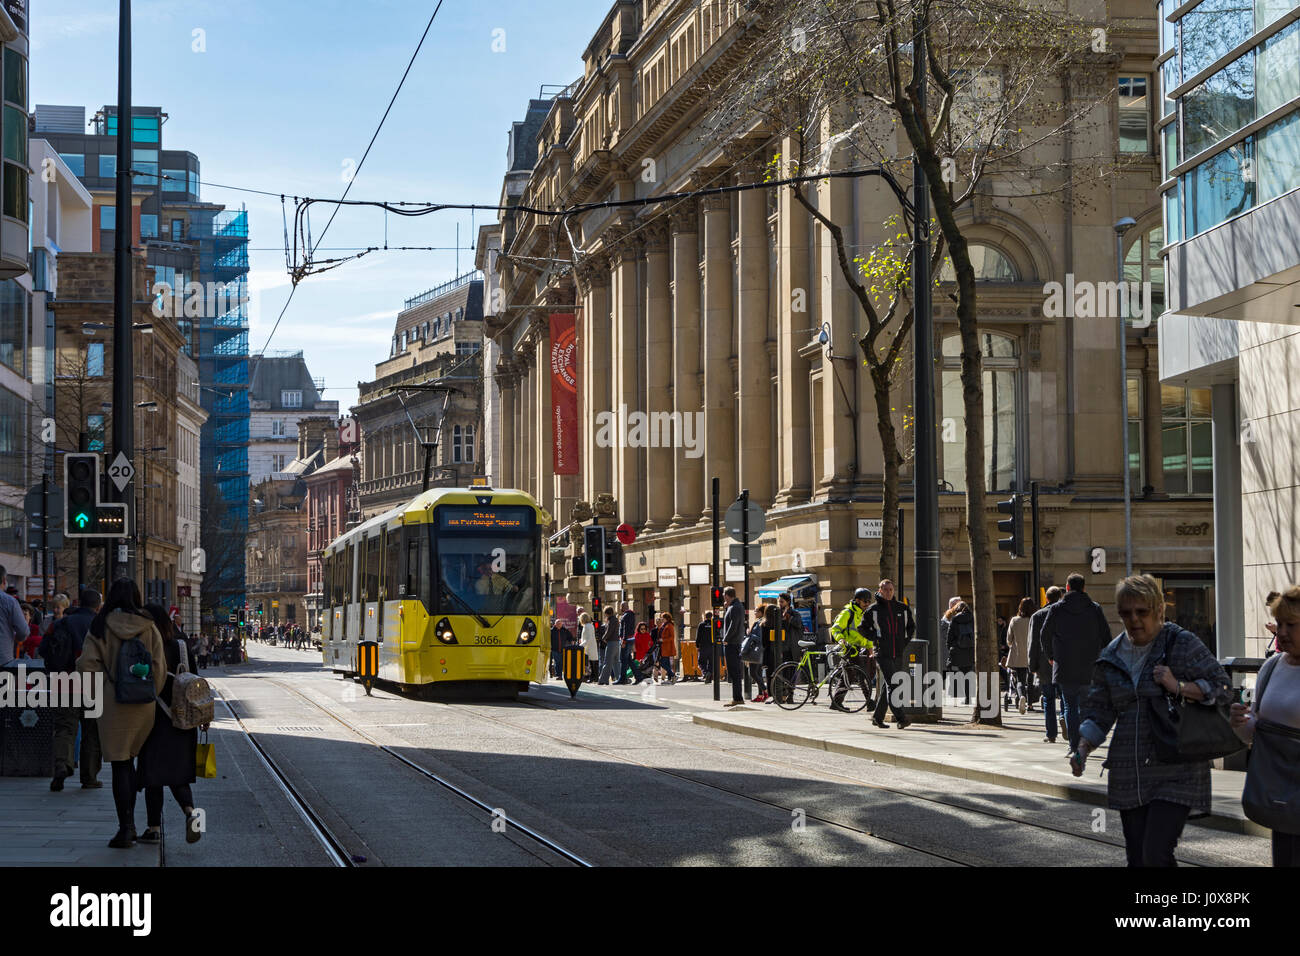 The newly completed Second City Crossing tram route, by the Exchange Theatre, Cross Street, Manchester, England, UK Stock Photo